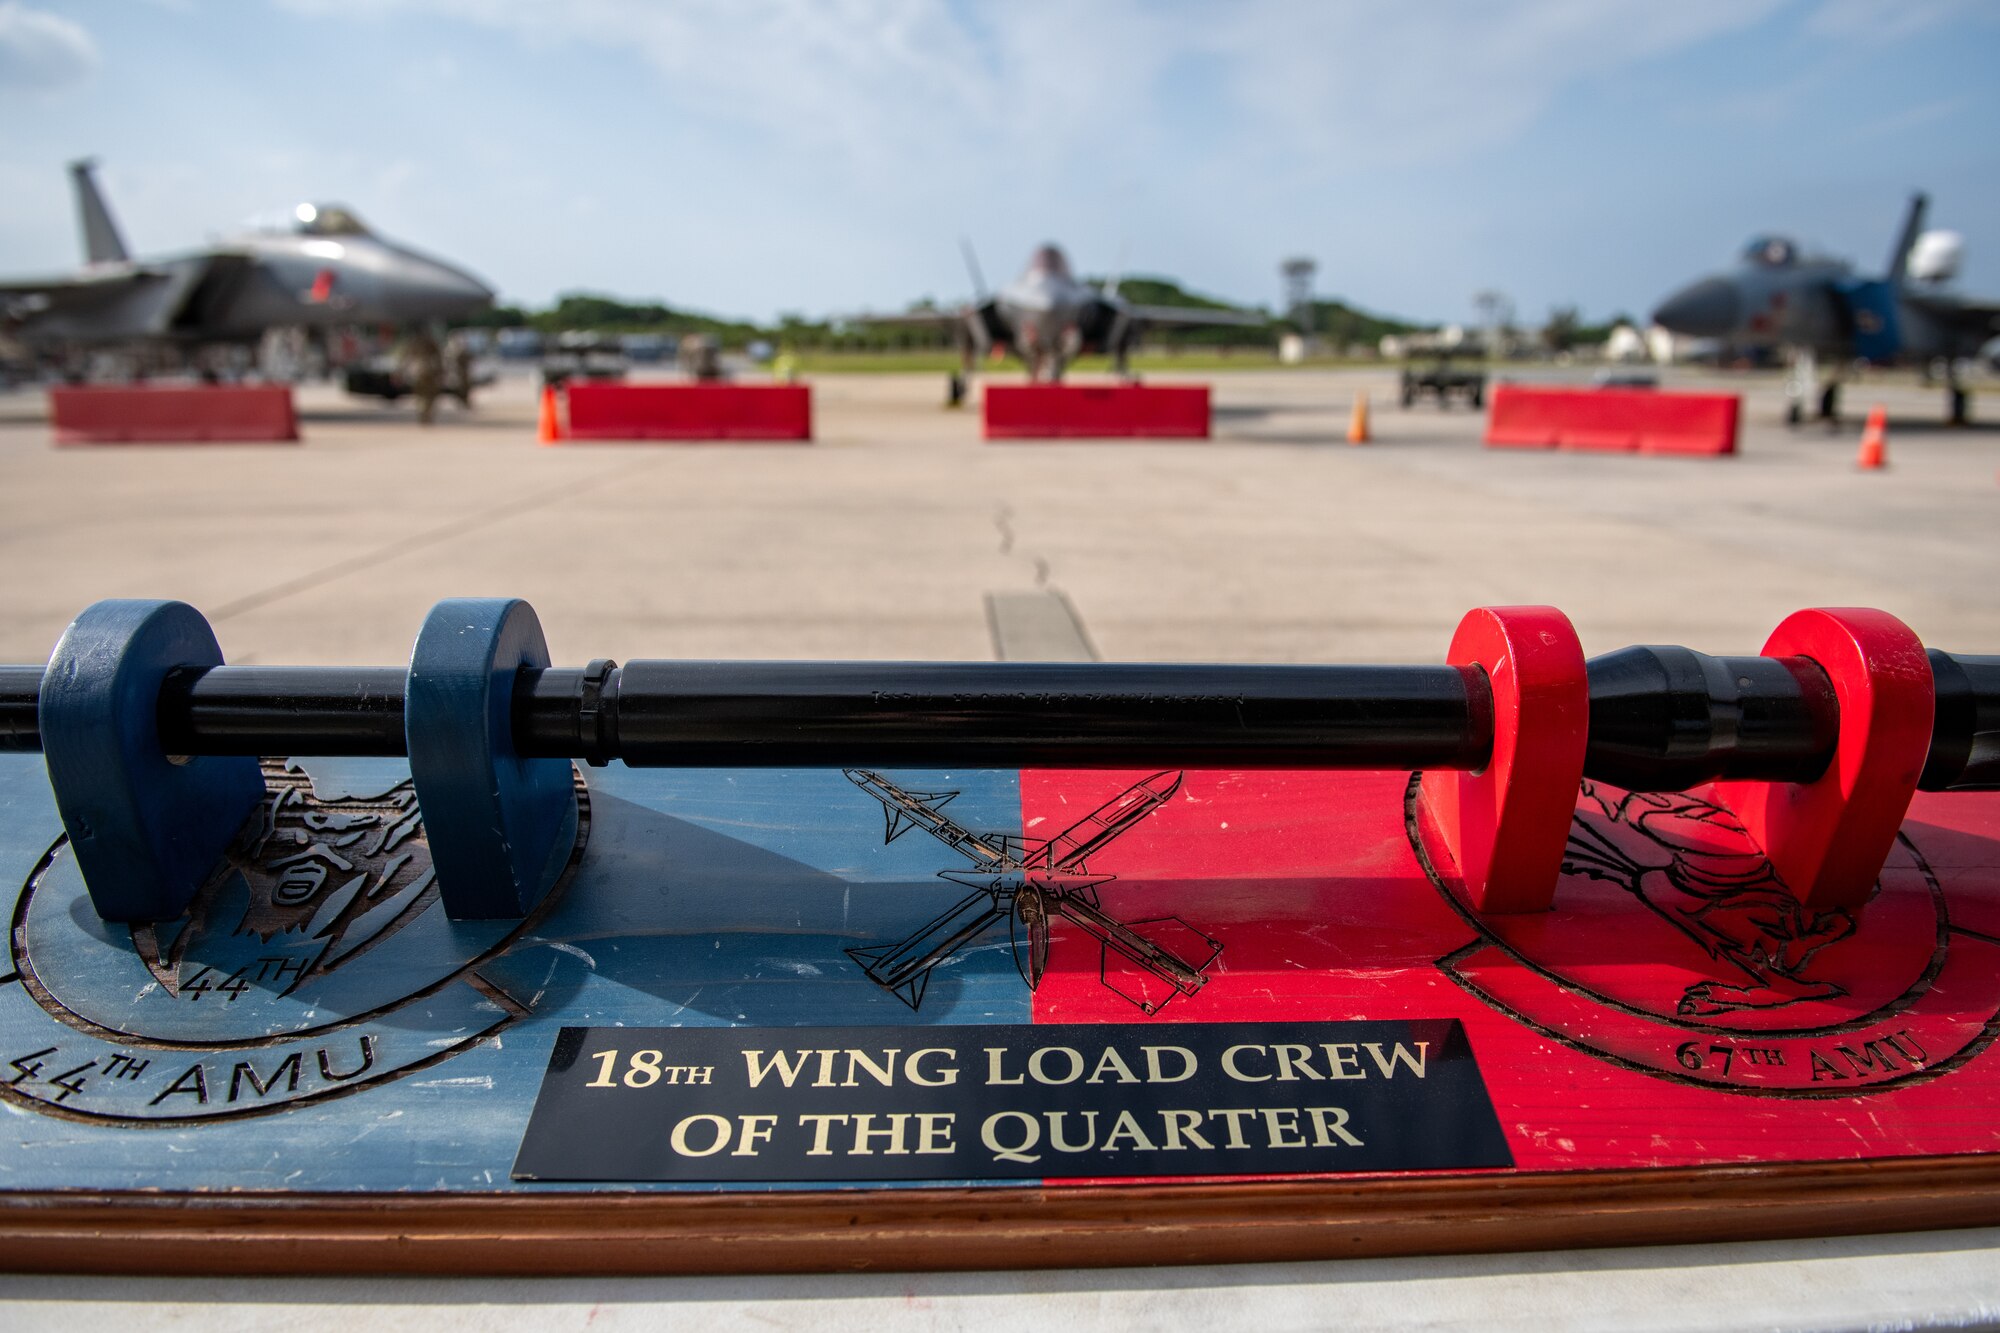 The 18th Wing Load Crew of the Quarter trophy awaits its newest keeper prior to a weapons load competition at Kadena Air Base, Japan, Nov. 17, 2023. The competition pitted Active Duty and Air National Guard Airmen from three squadrons against each other to determine the finest weapons load team at the Keystone of the Pacific. (U.S. Air Force Photo by Lt. Col. Raymond Geoffroy)